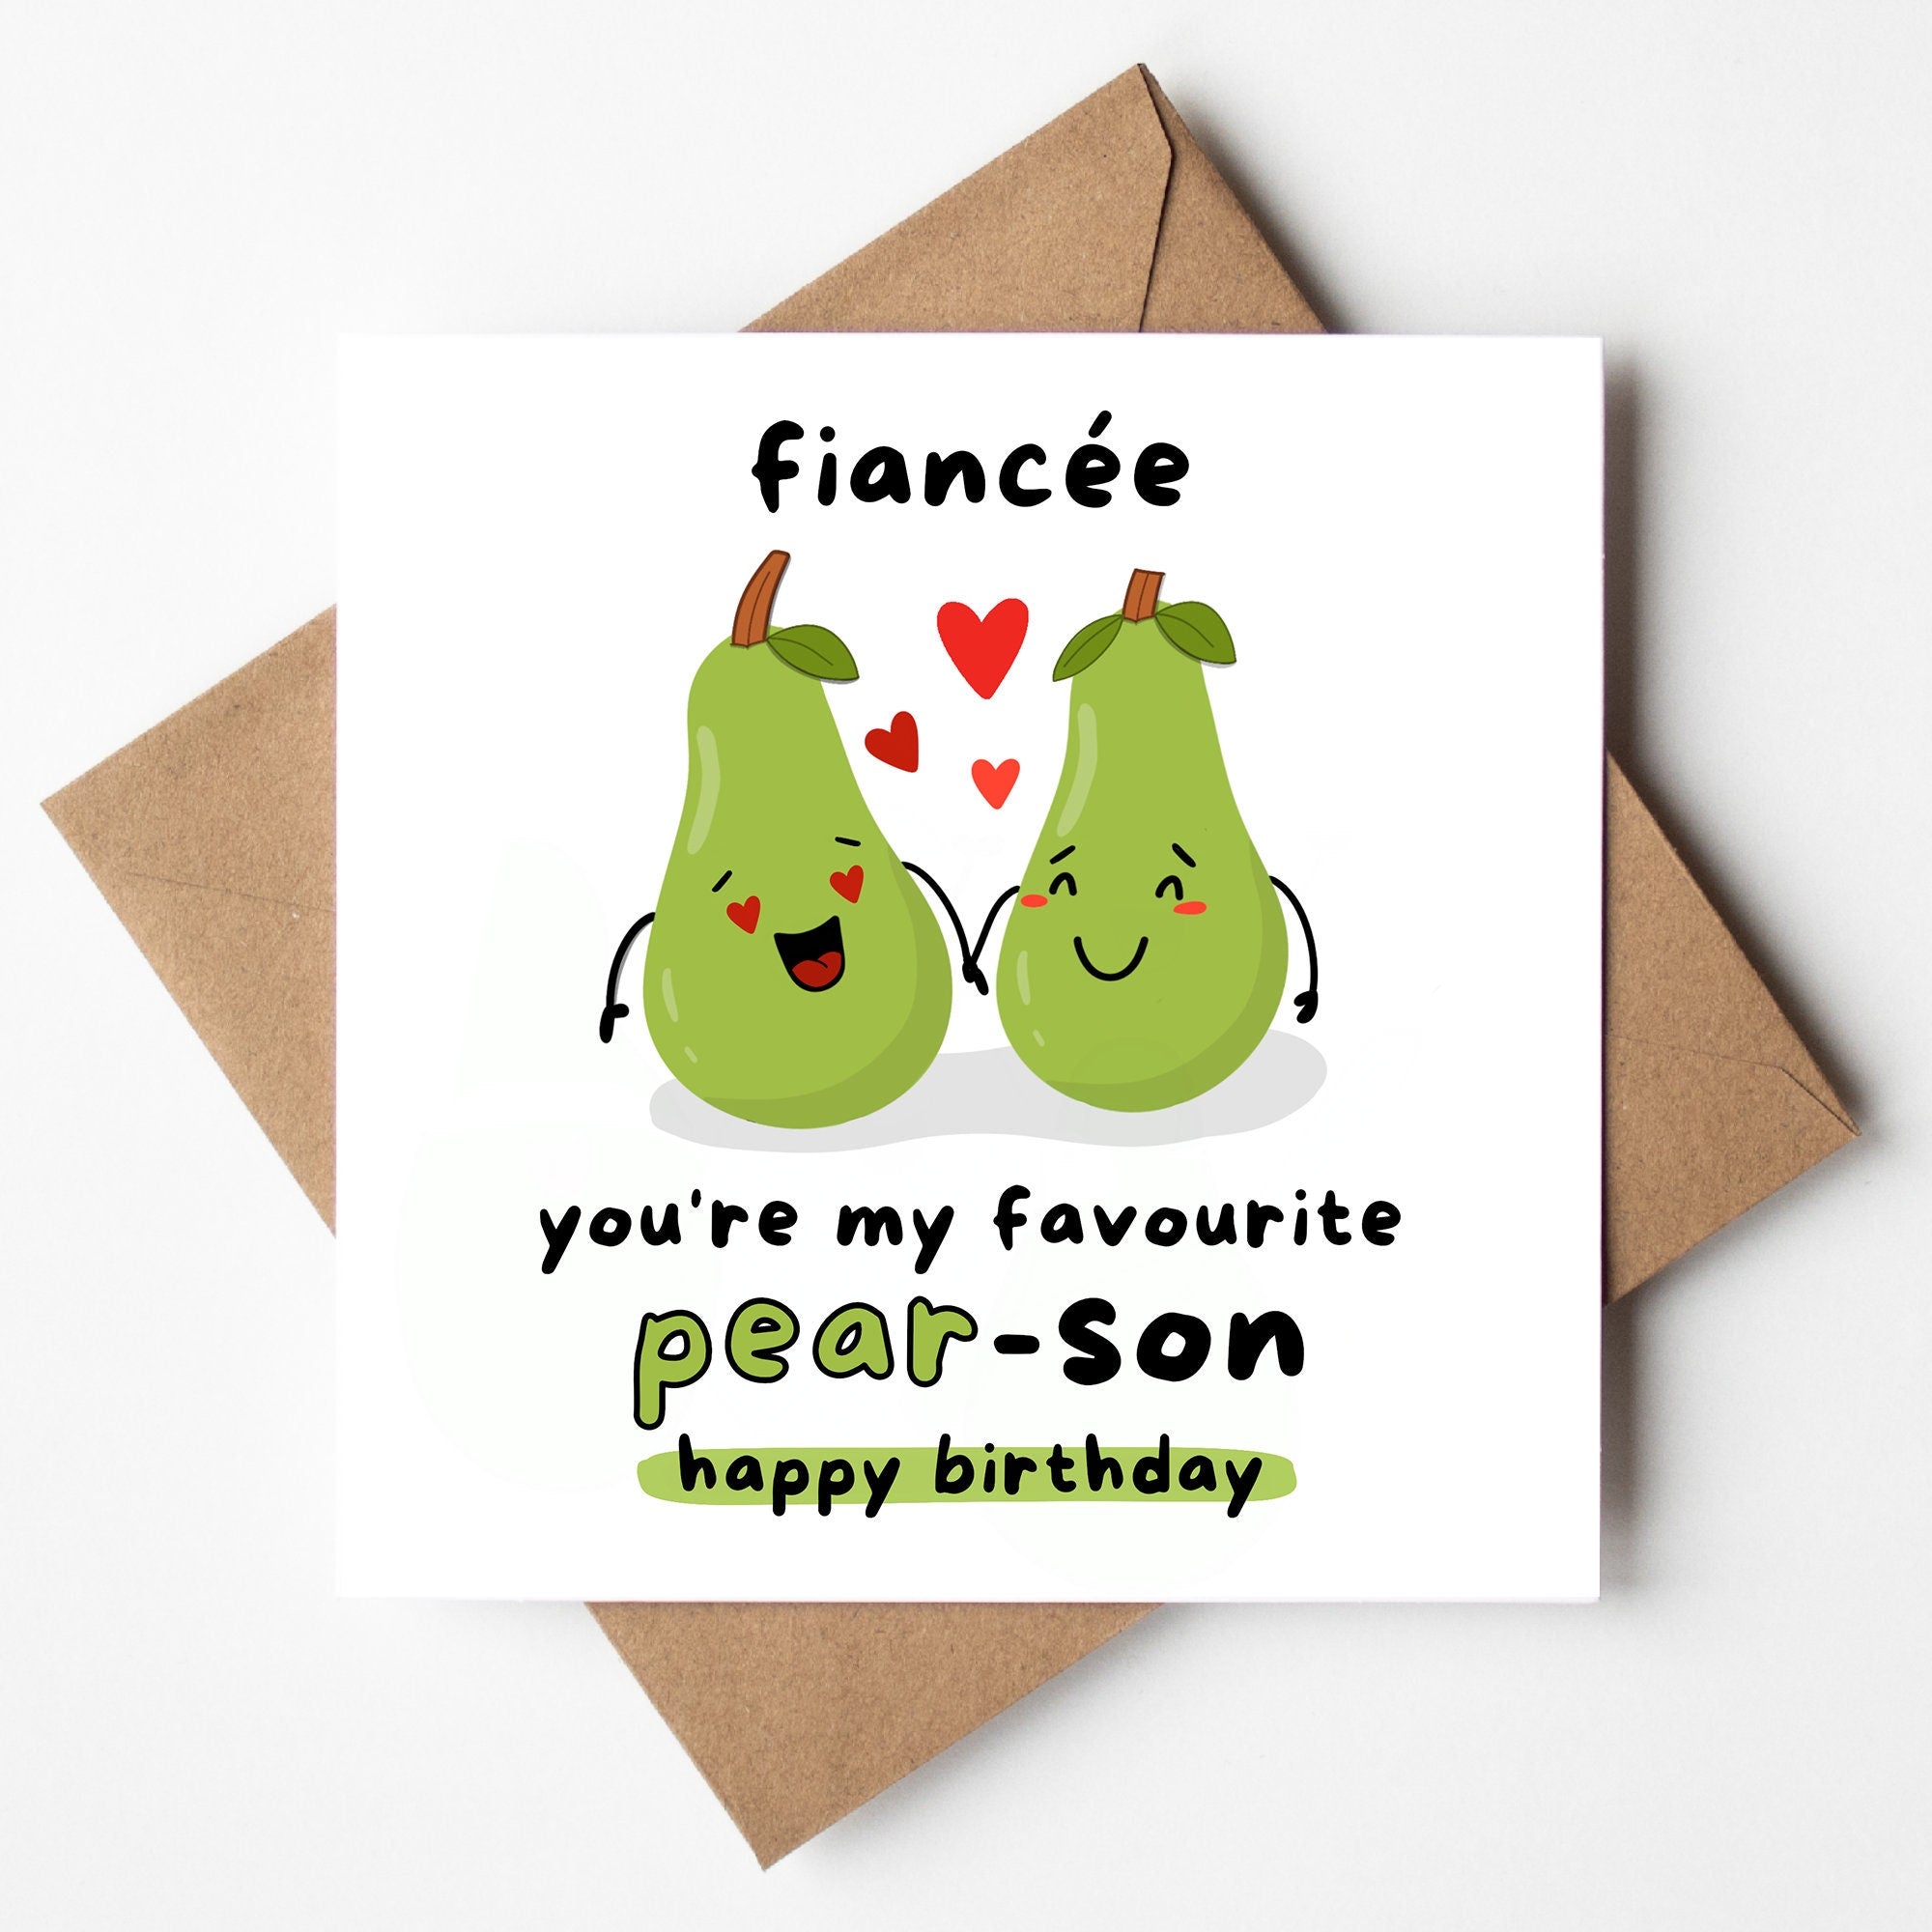 Fiancee You're my favourite pear-son happy birthday, best fiancee ever, from fiance, funny birthday card